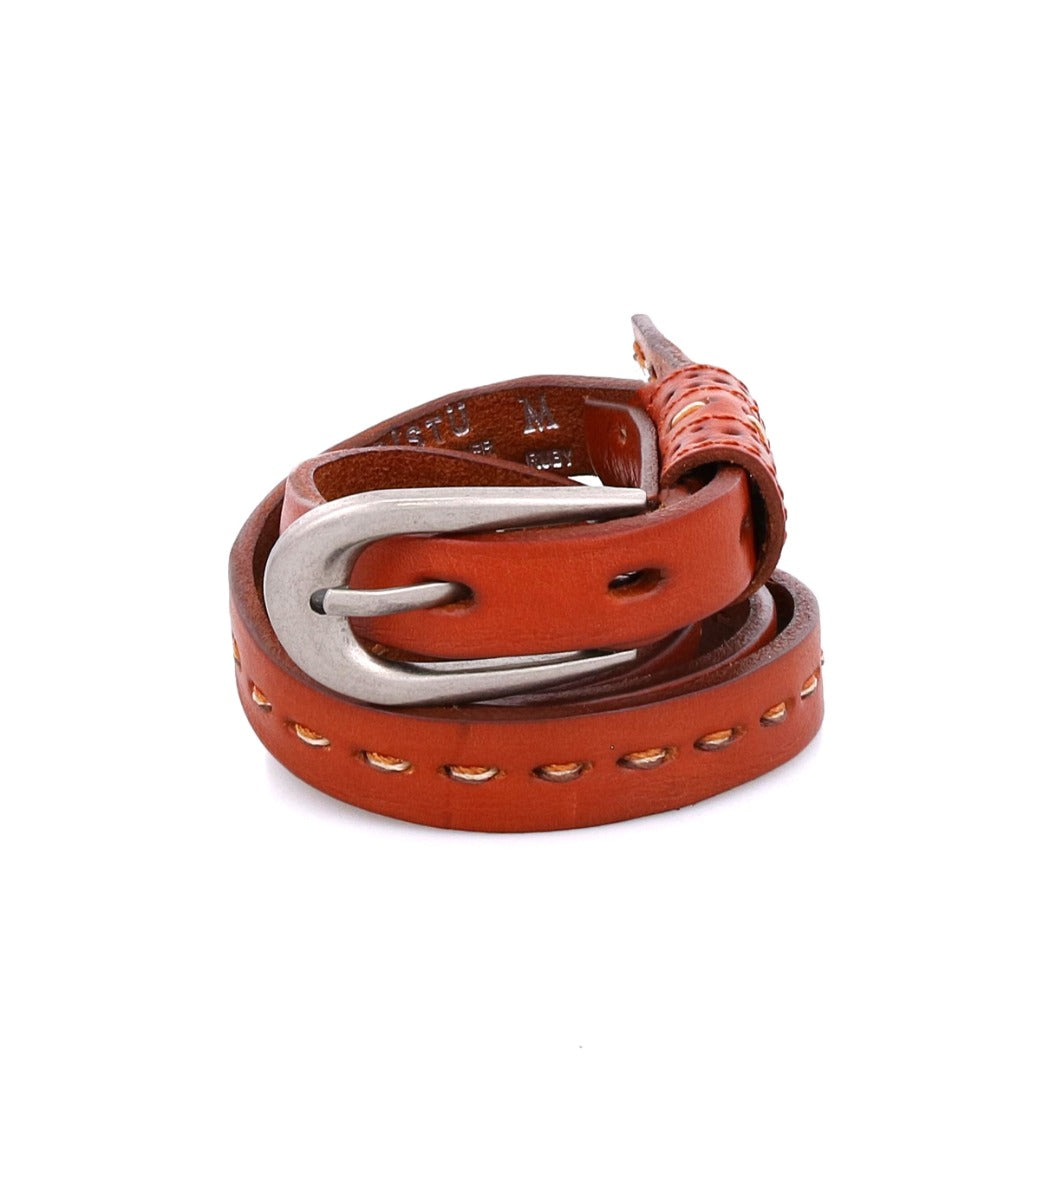 A Ruby leather belt with a metal buckle by Bed Stu.